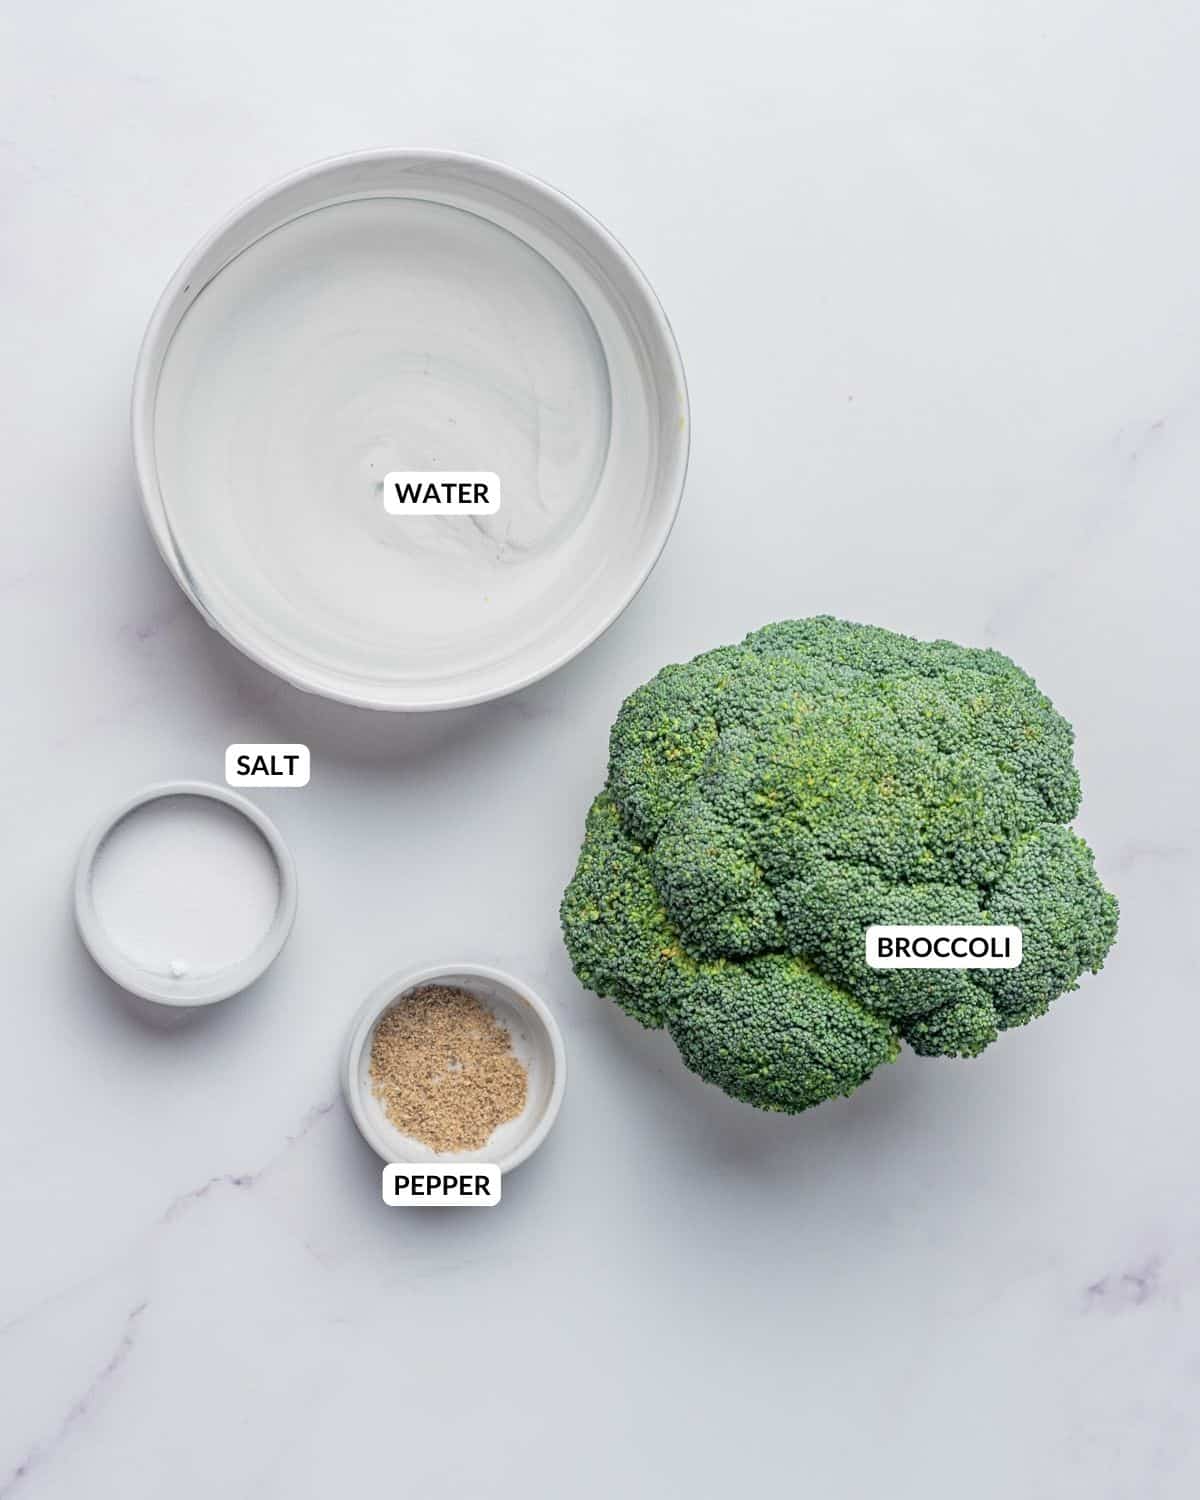 Overhead image of labeled ingredients for microwave broccoli